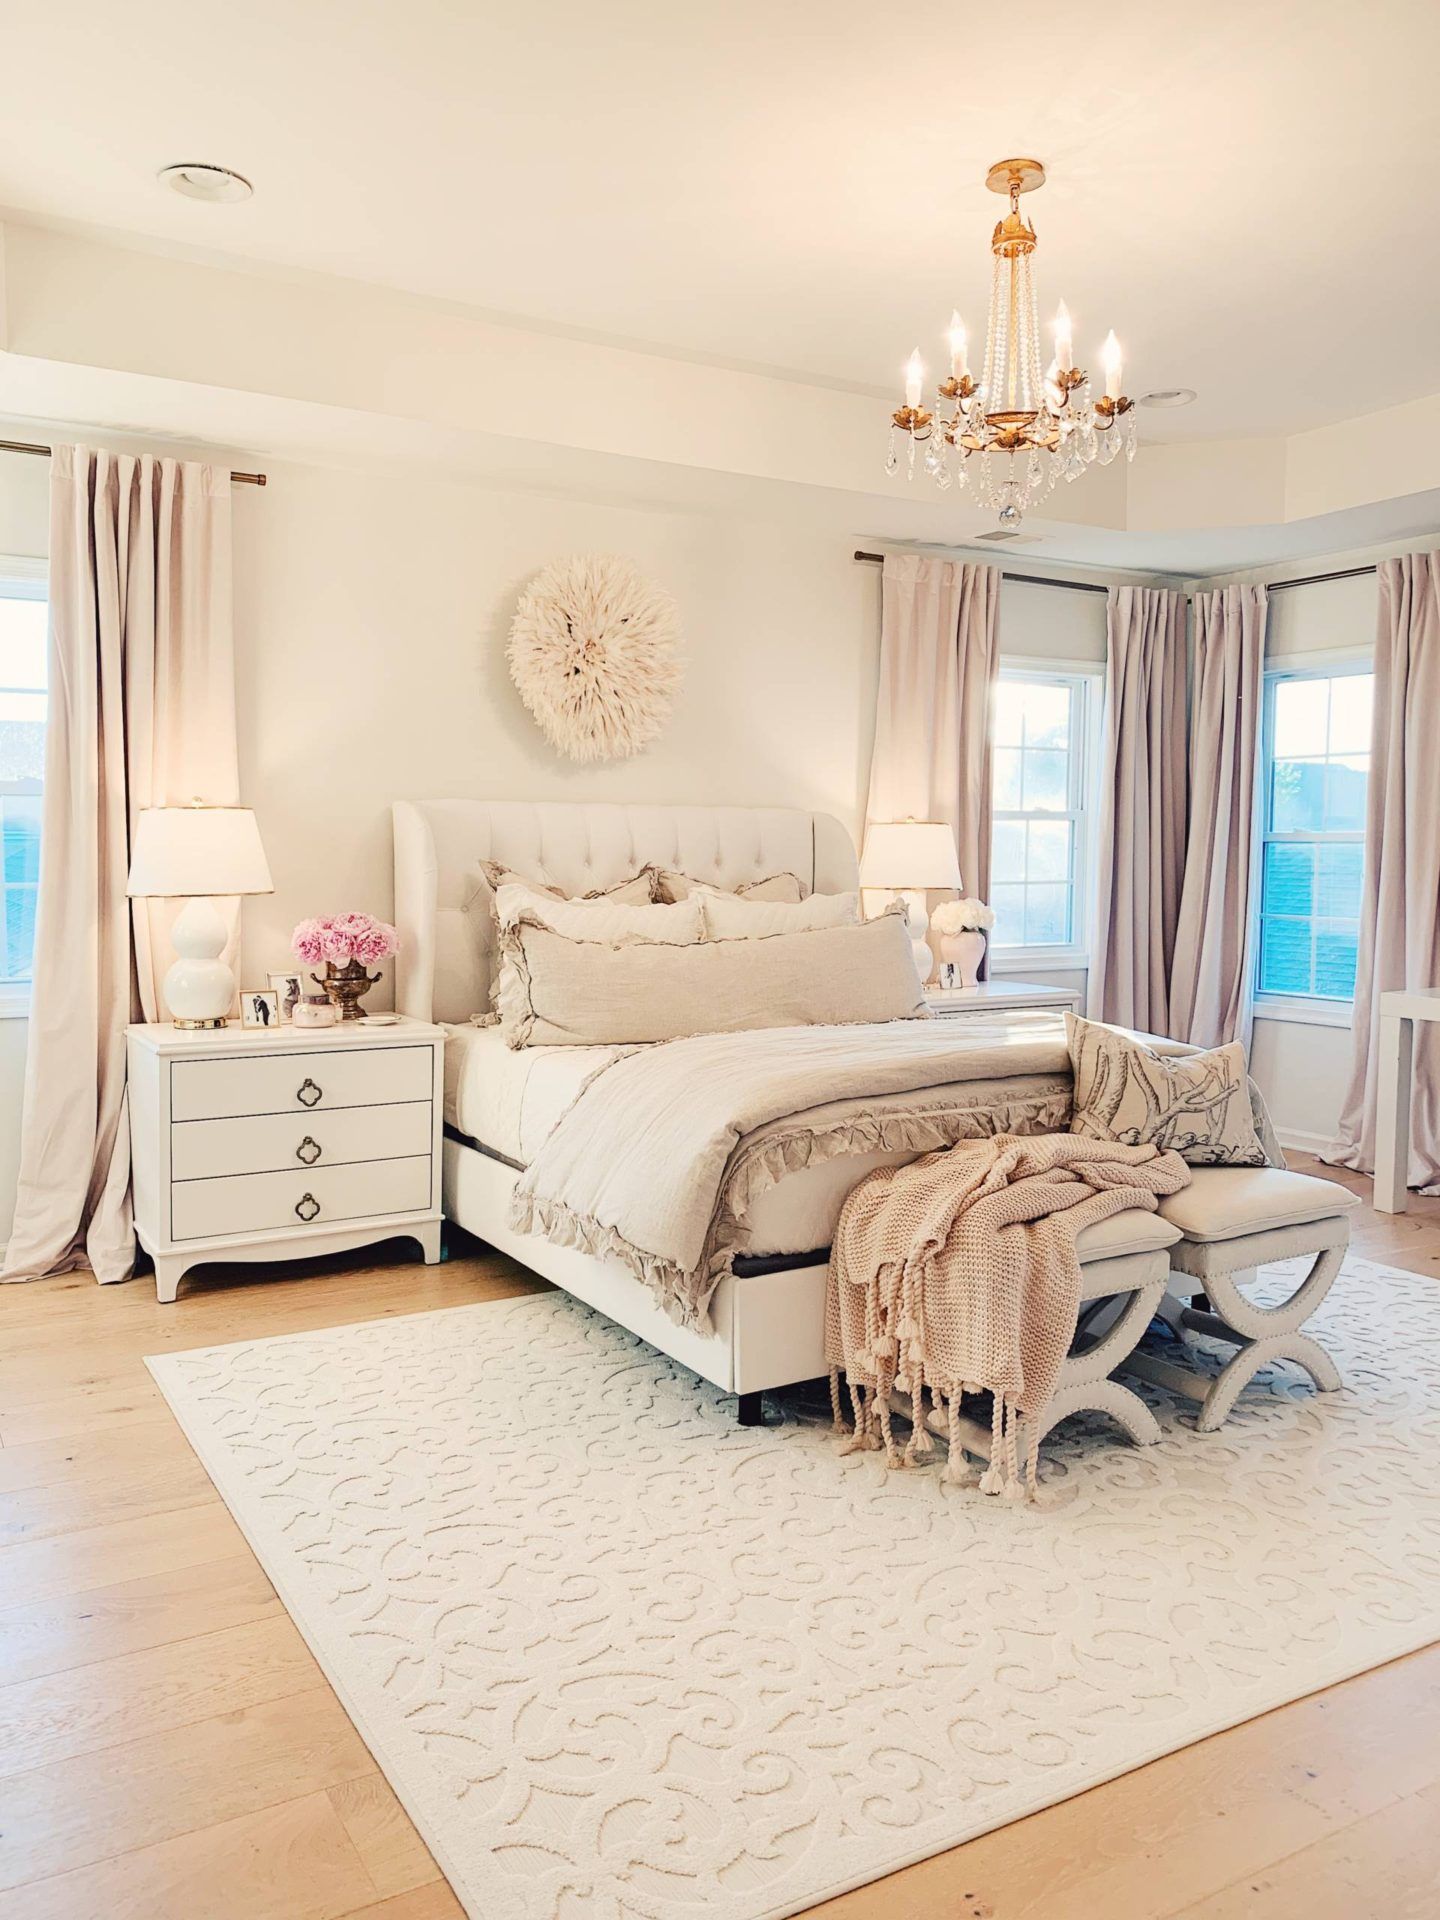 Ideas Of Interior Decor For A Double Bedroom